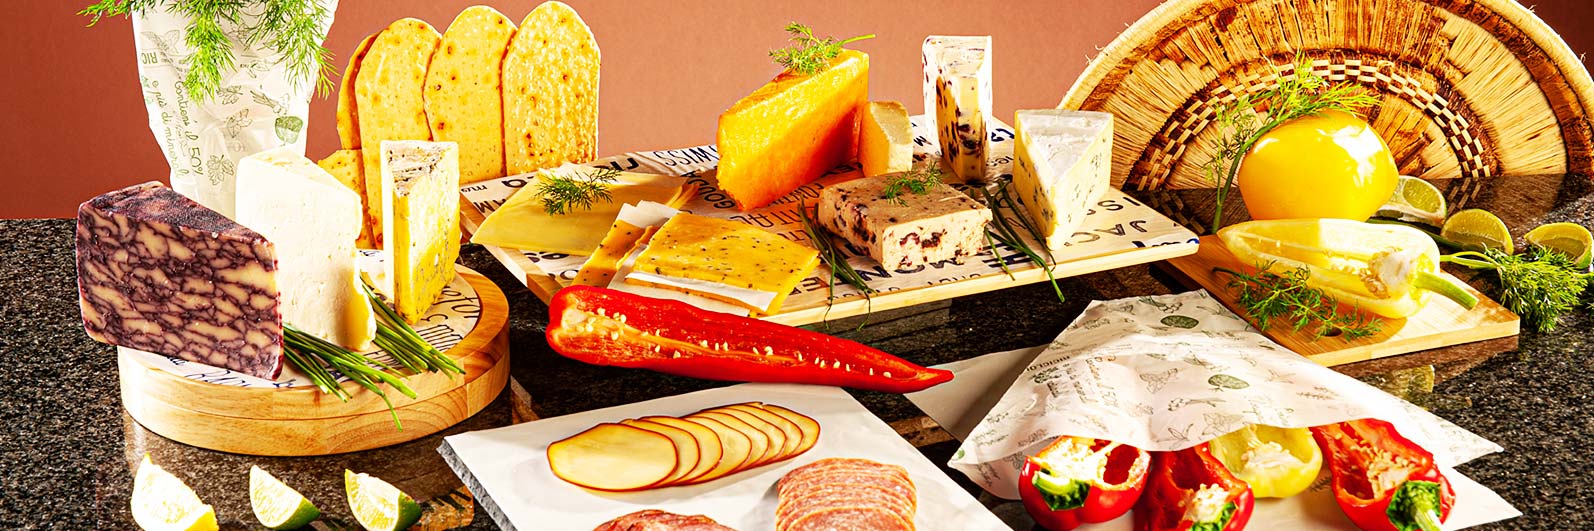 Suppliers of Cut-To-Size Food Packaging Solutions UK